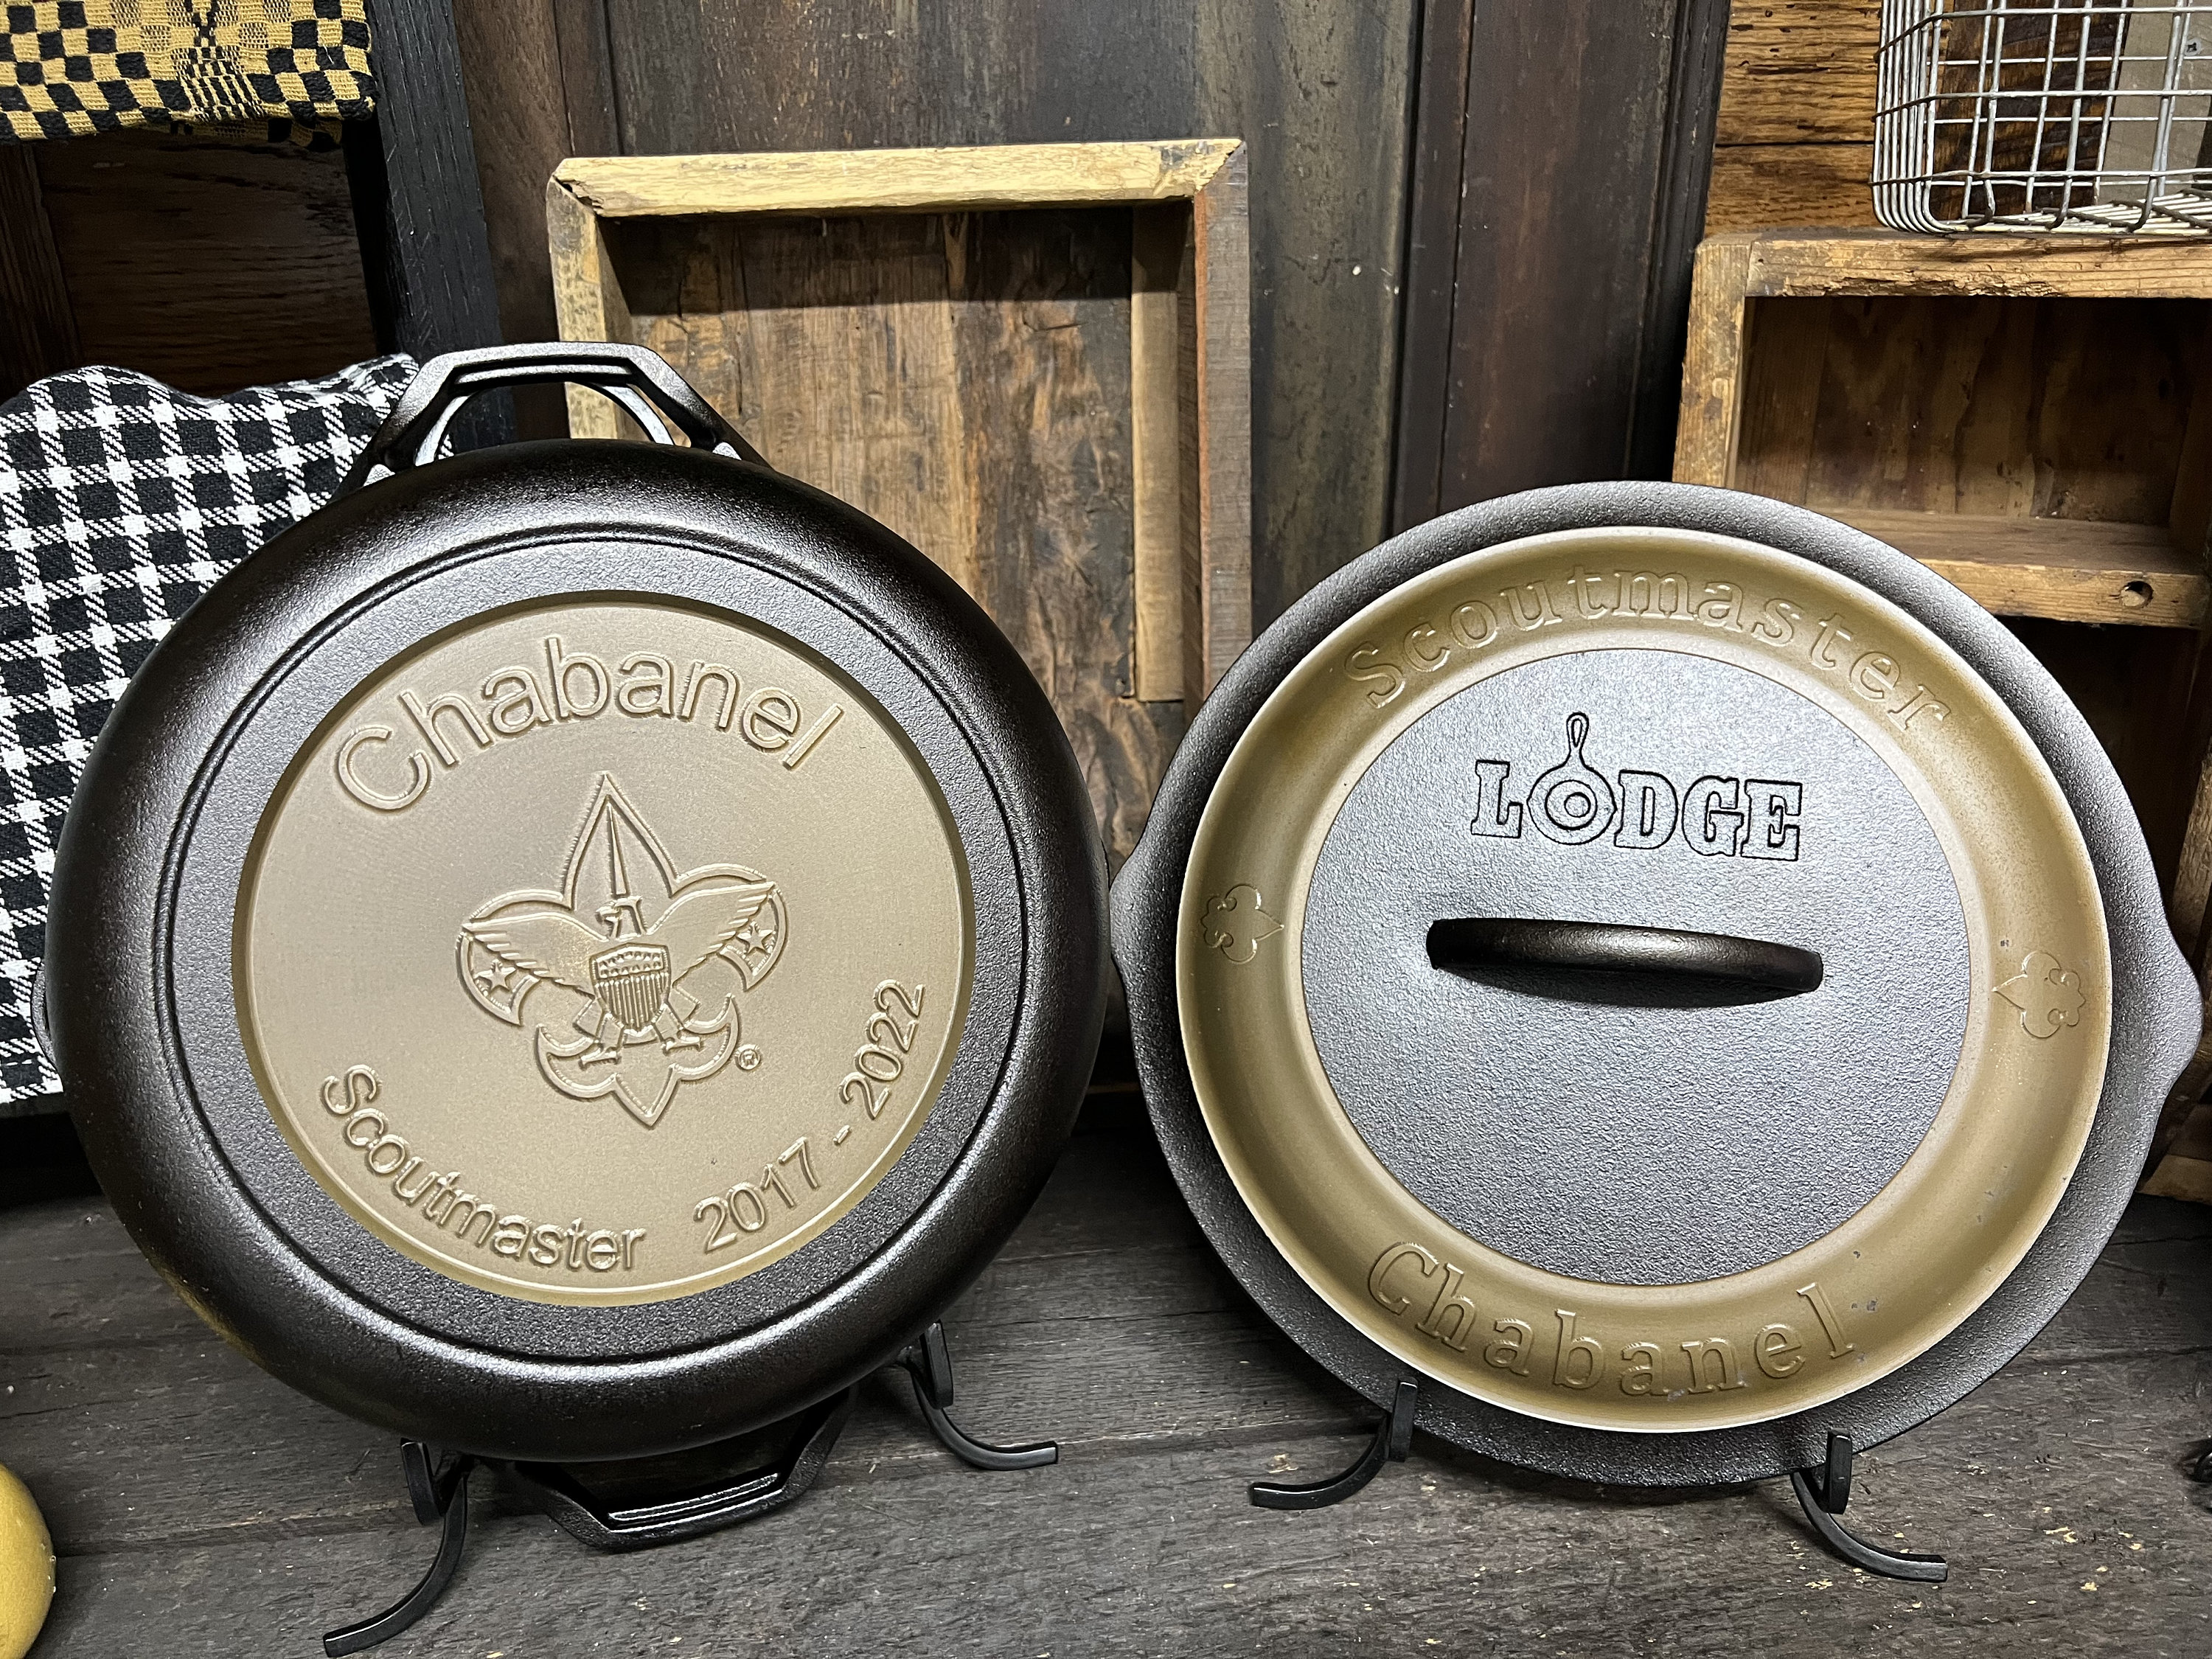 What is included in the parts and accessories of the Instant Pot Precision  Dutch Oven?